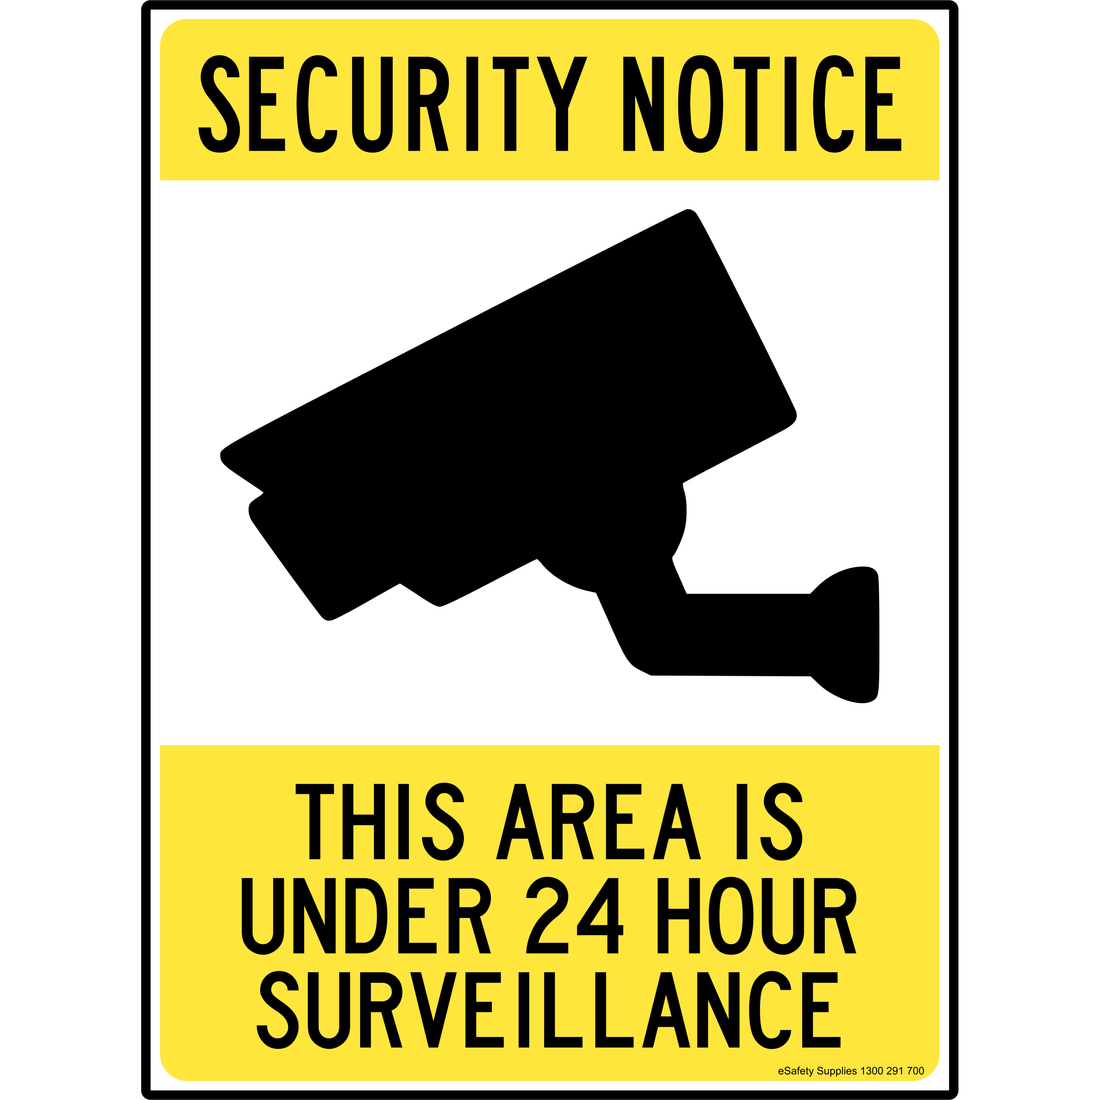 SECURITY NOTICE - THIS AREA IS UNDER 24 HOUR SURVEILLANCE